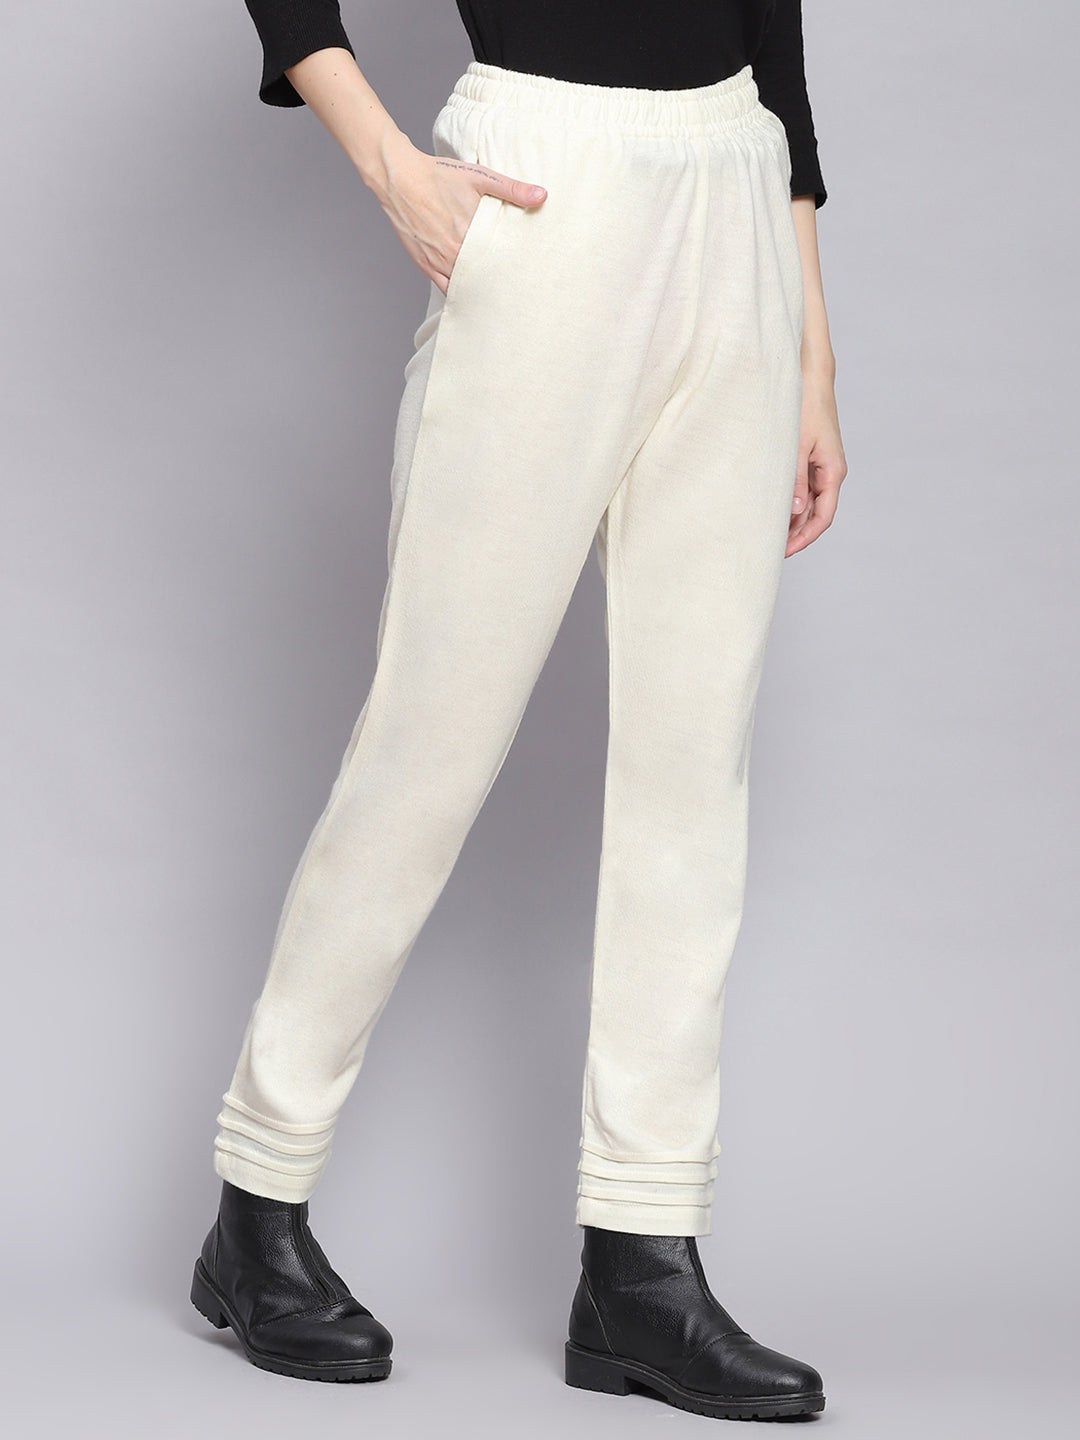 Women Off White Solid Regular Fit Lowers